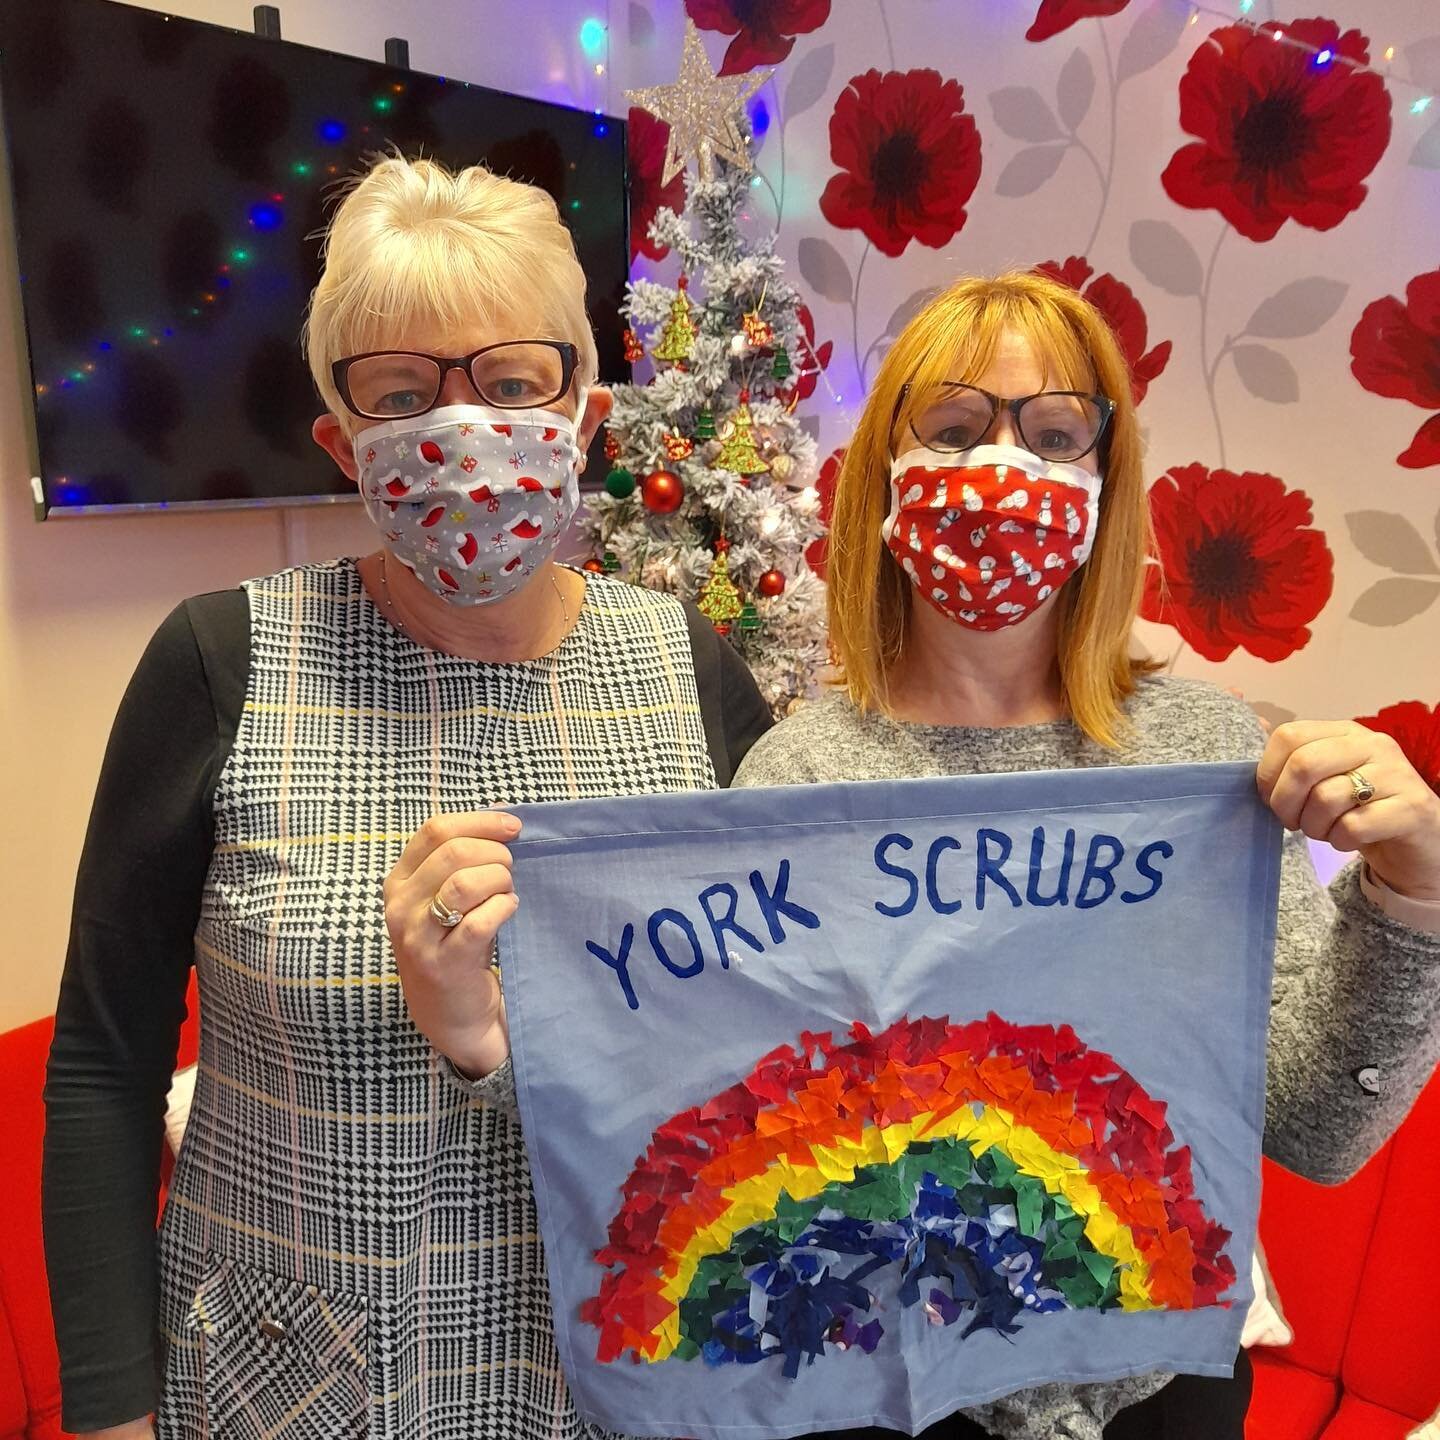 It&rsquo;s great to see the face coverings in action!
.
.
&lsquo;On behalf of Poppleton Ousebank Primary School, thank you so much for the wonderful masks and the Christmas one received yesterday.  They are amazing and cheer us all up.&rsquo;
.
.
#fe